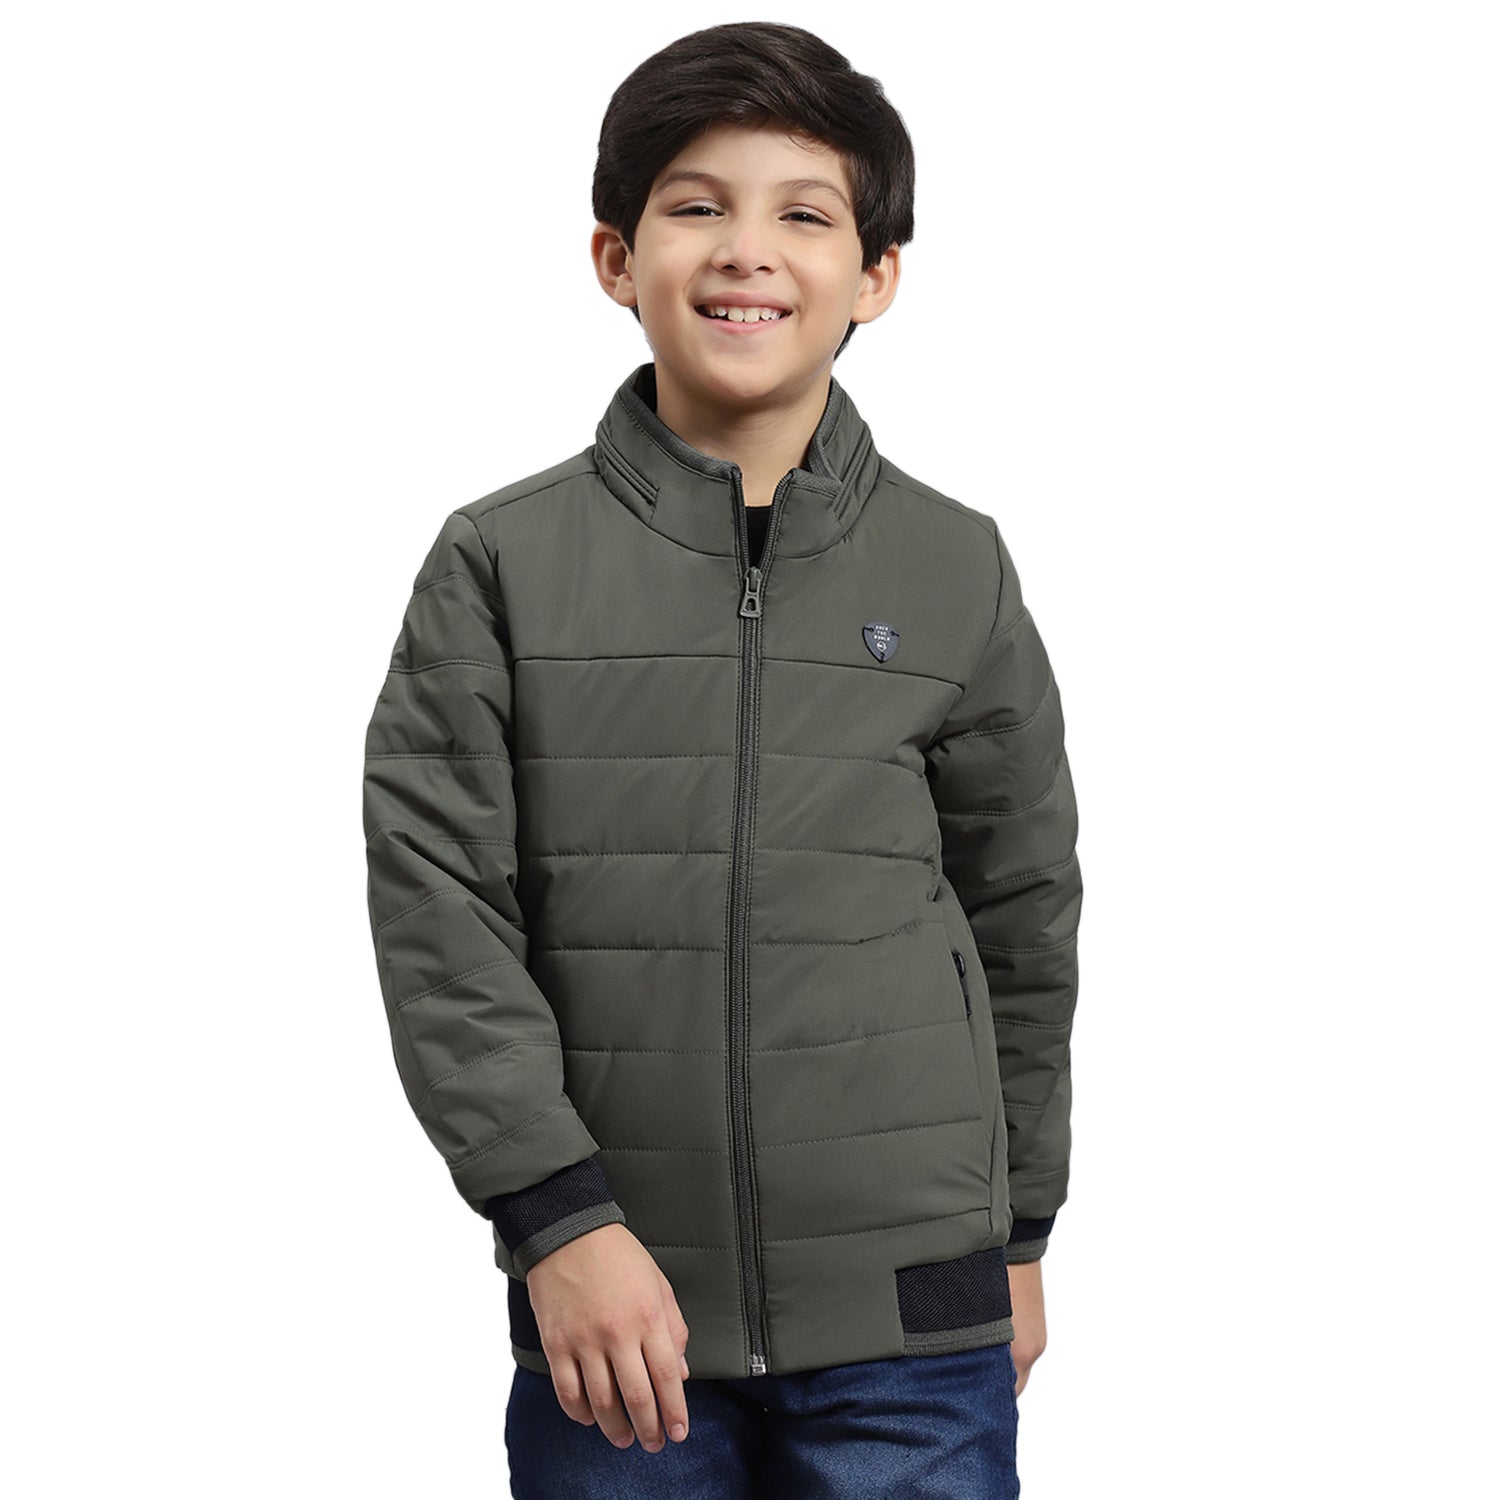 Boys Olive Solid Stand Collar Full Sleeve Boys Jacket